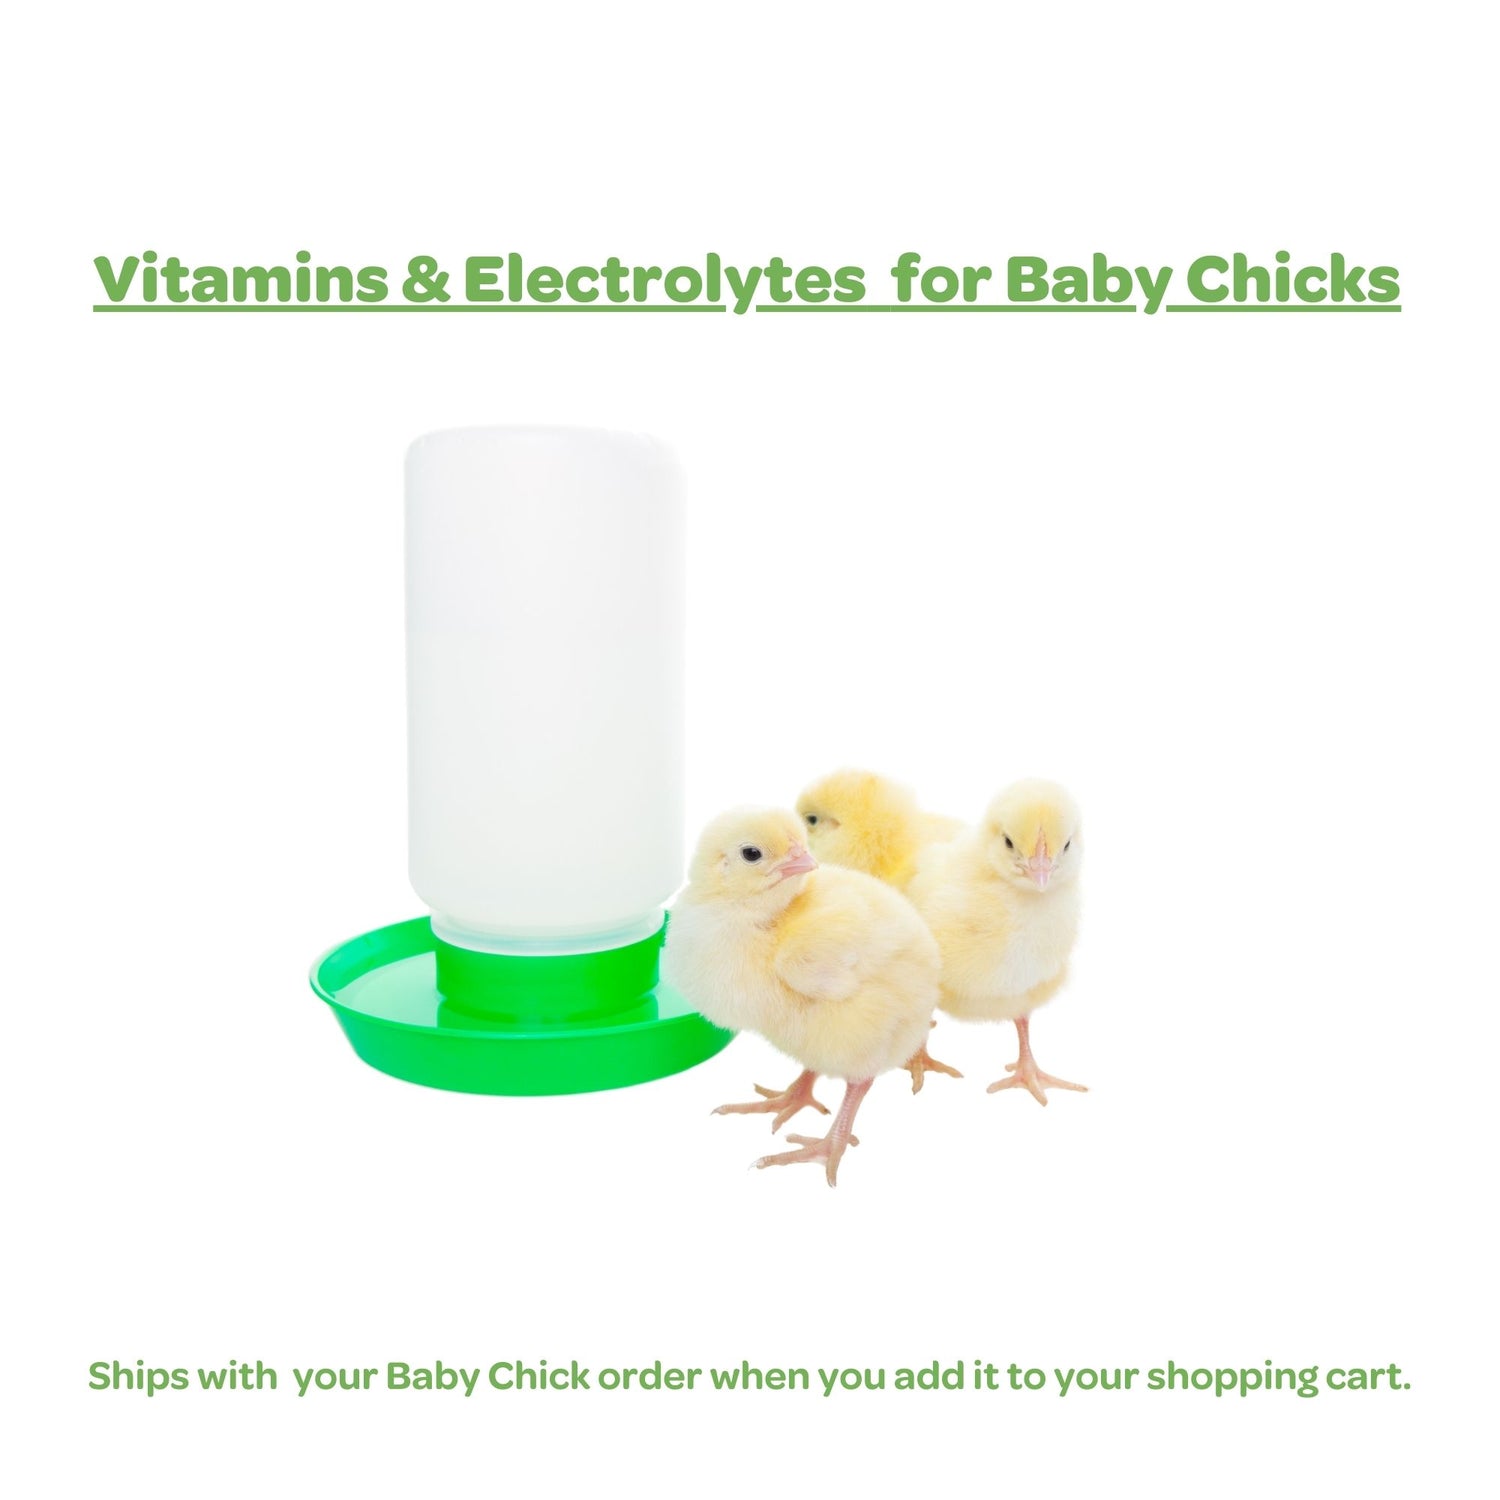 BVS Vitamins and Electrolytes, 4 oz Concentrate: Chick Order Add On